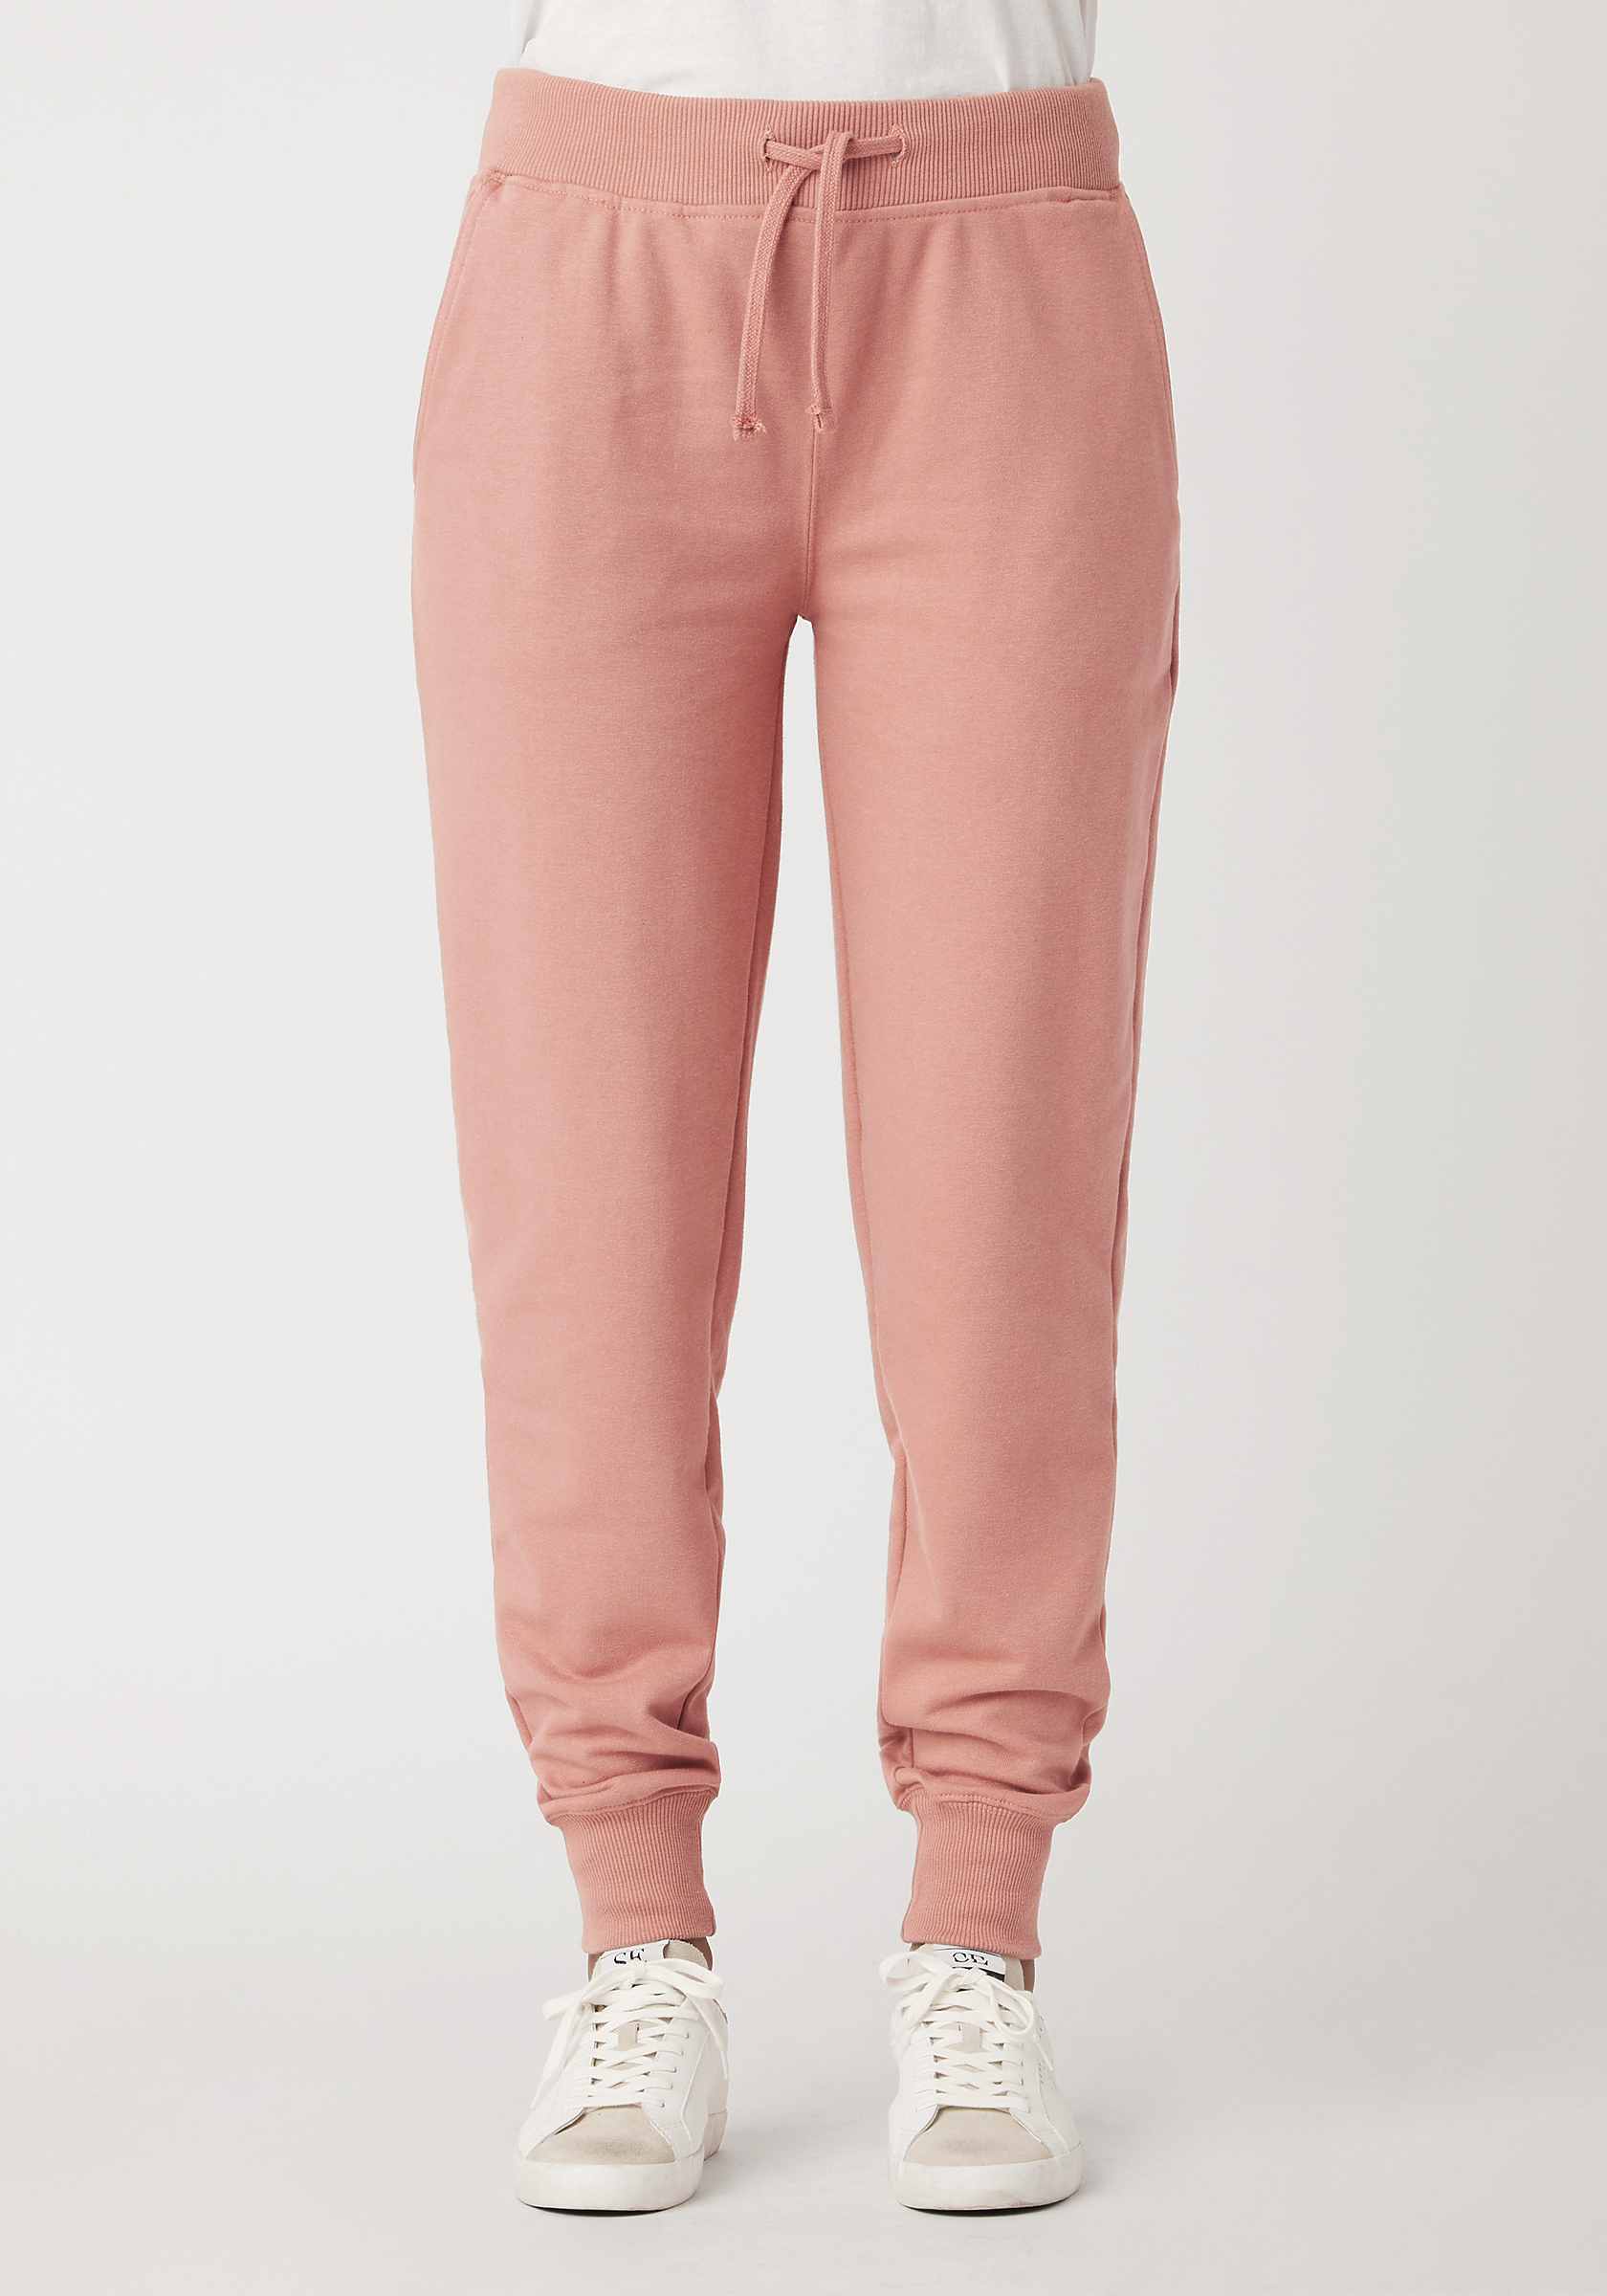 Women's French Terry Jogger